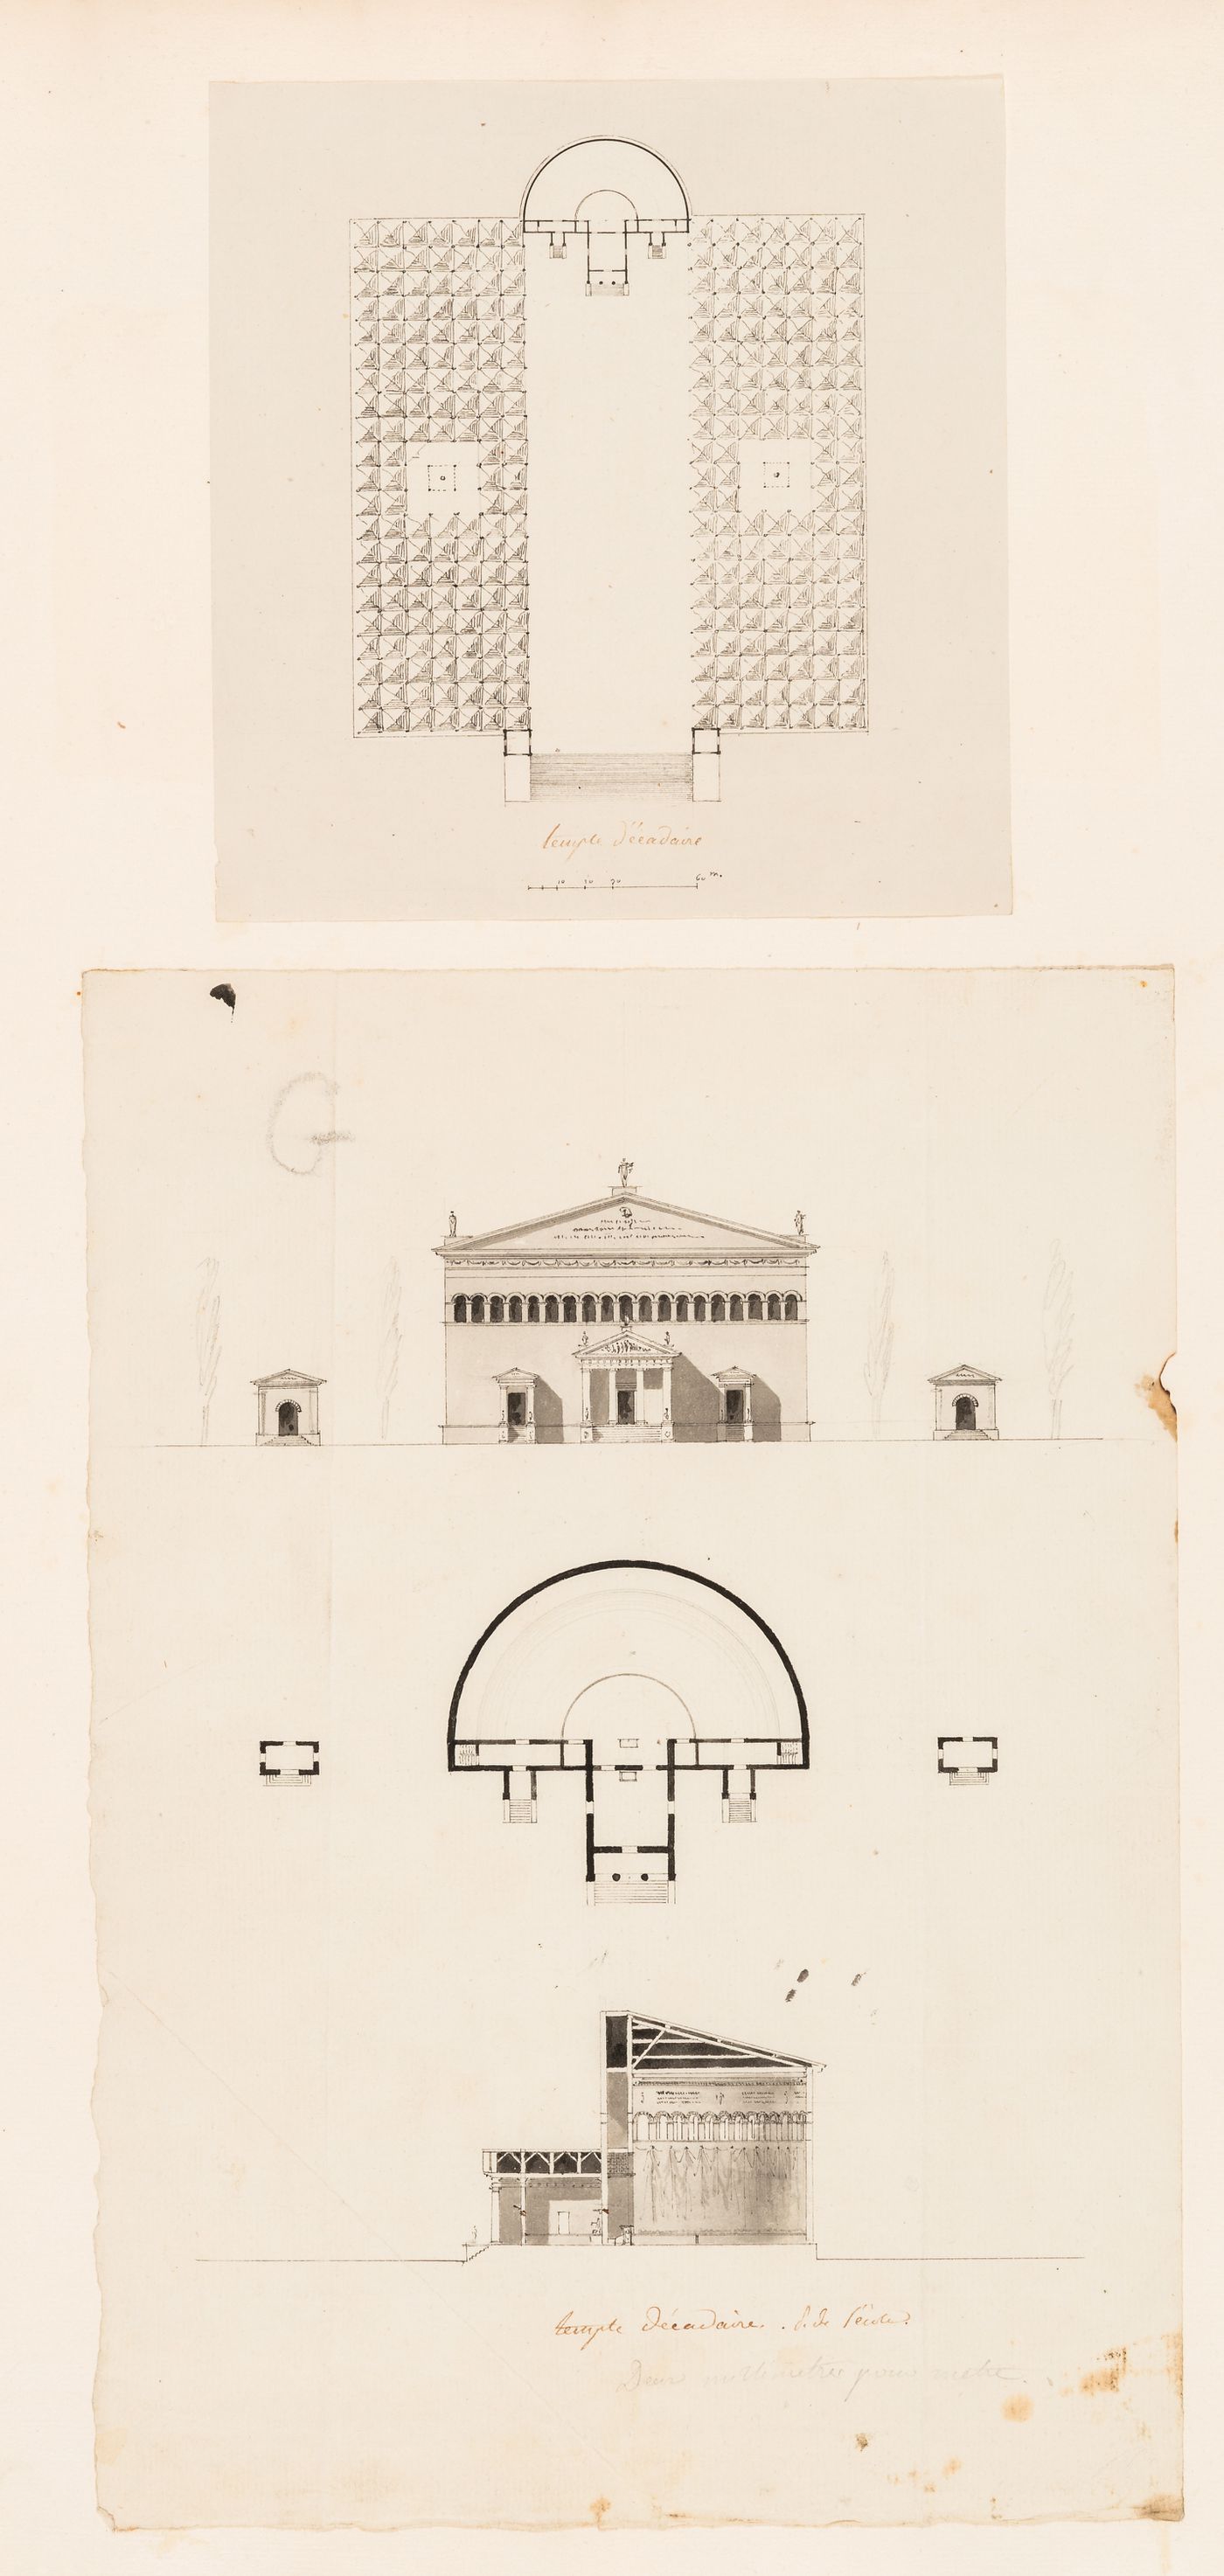 Plans for an école polytechnique; verso: Site plan, plan, elevation and section for a temple